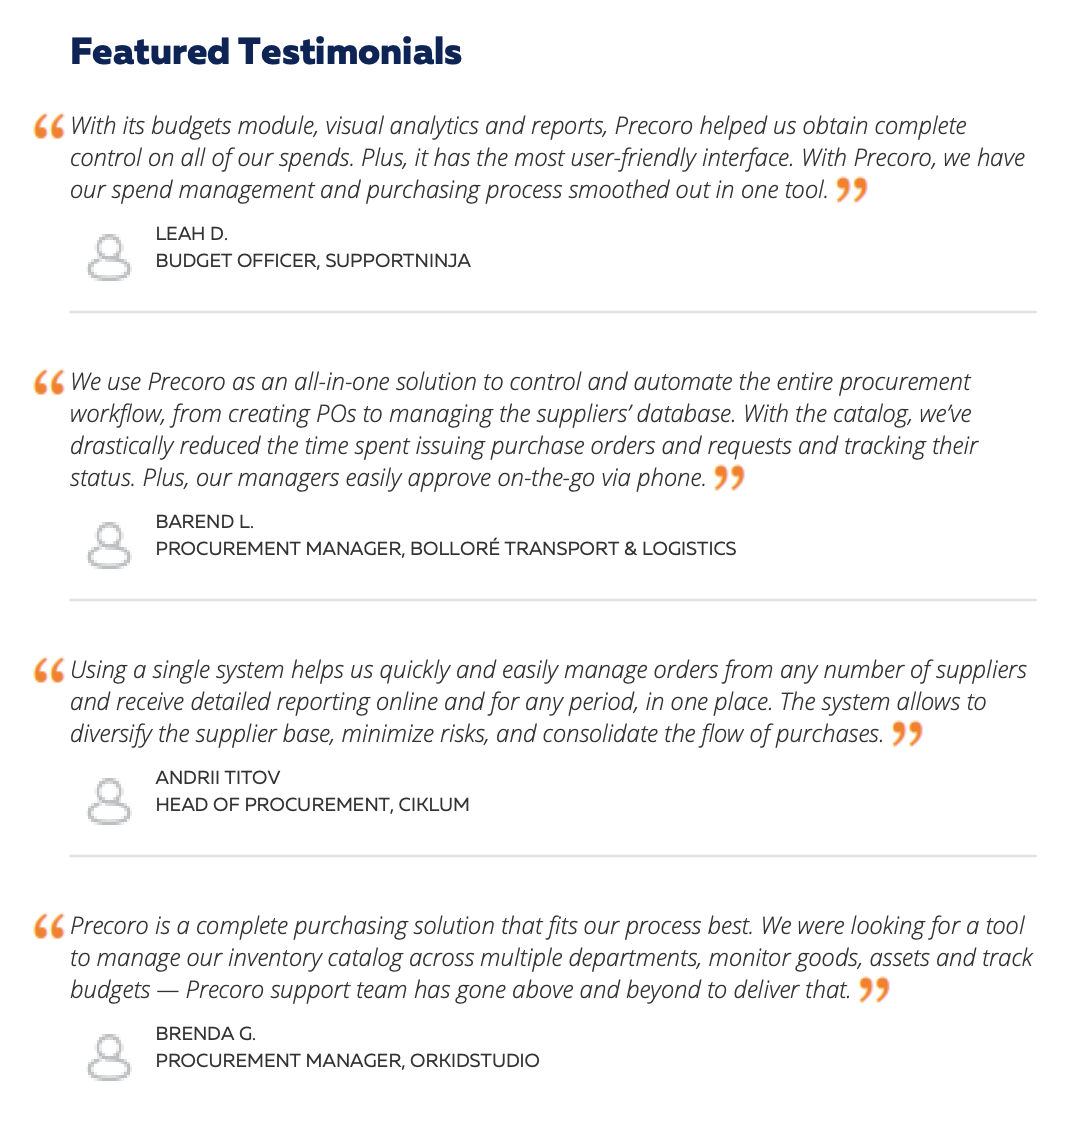 precoro reviews on featured customers